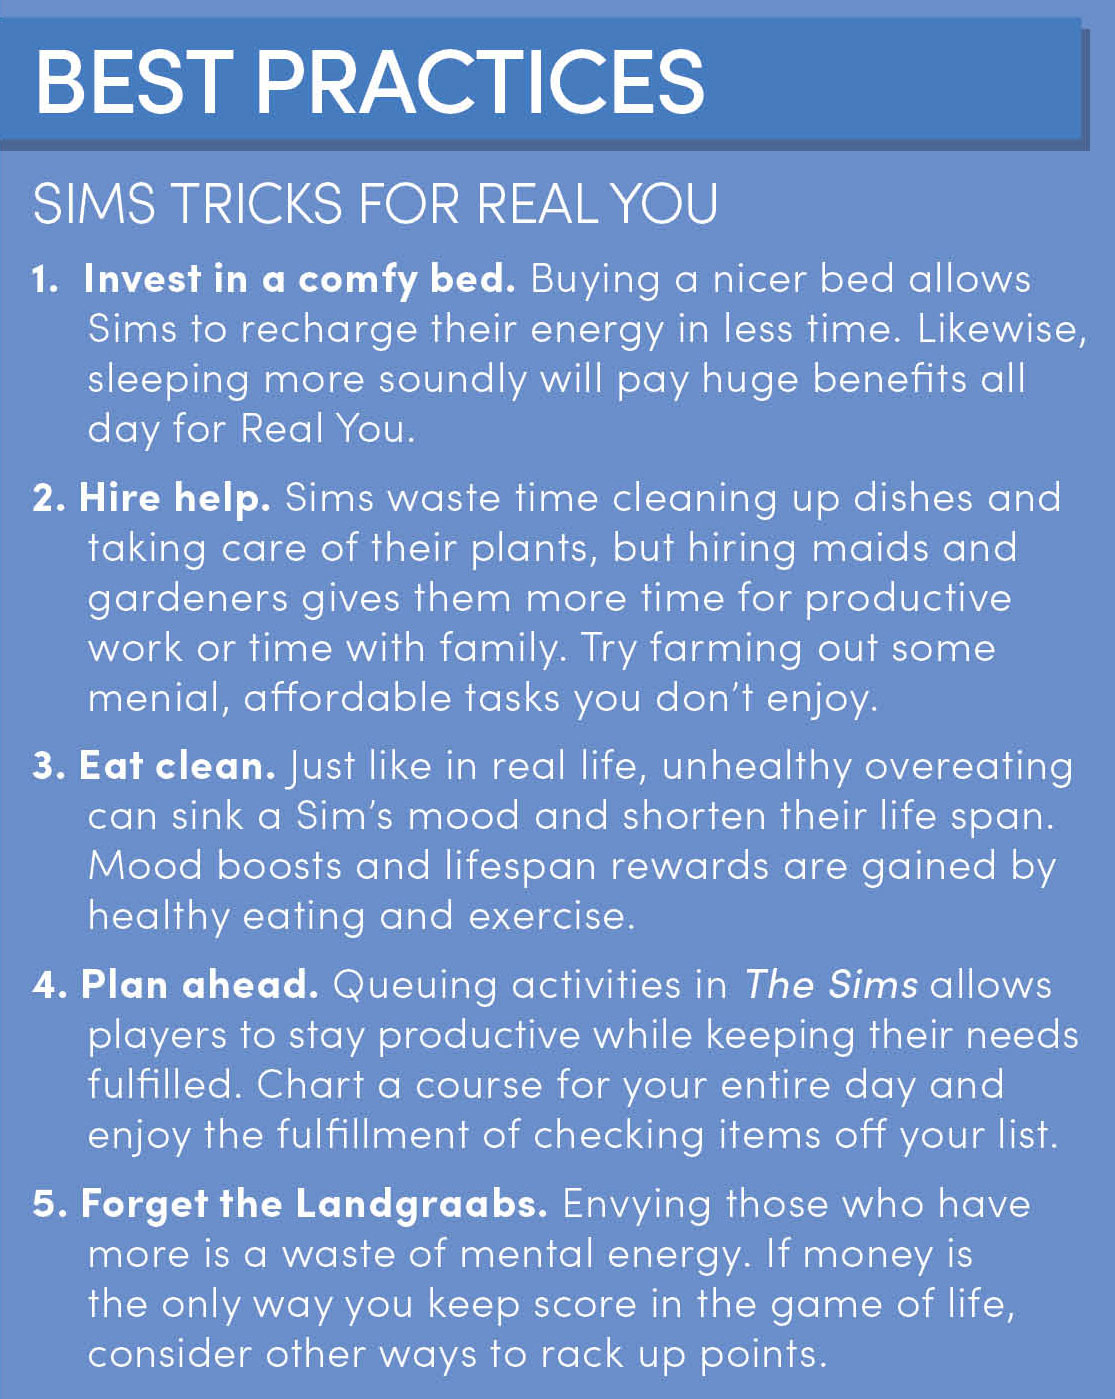 How Playing The Sims Taught Me to Really Live